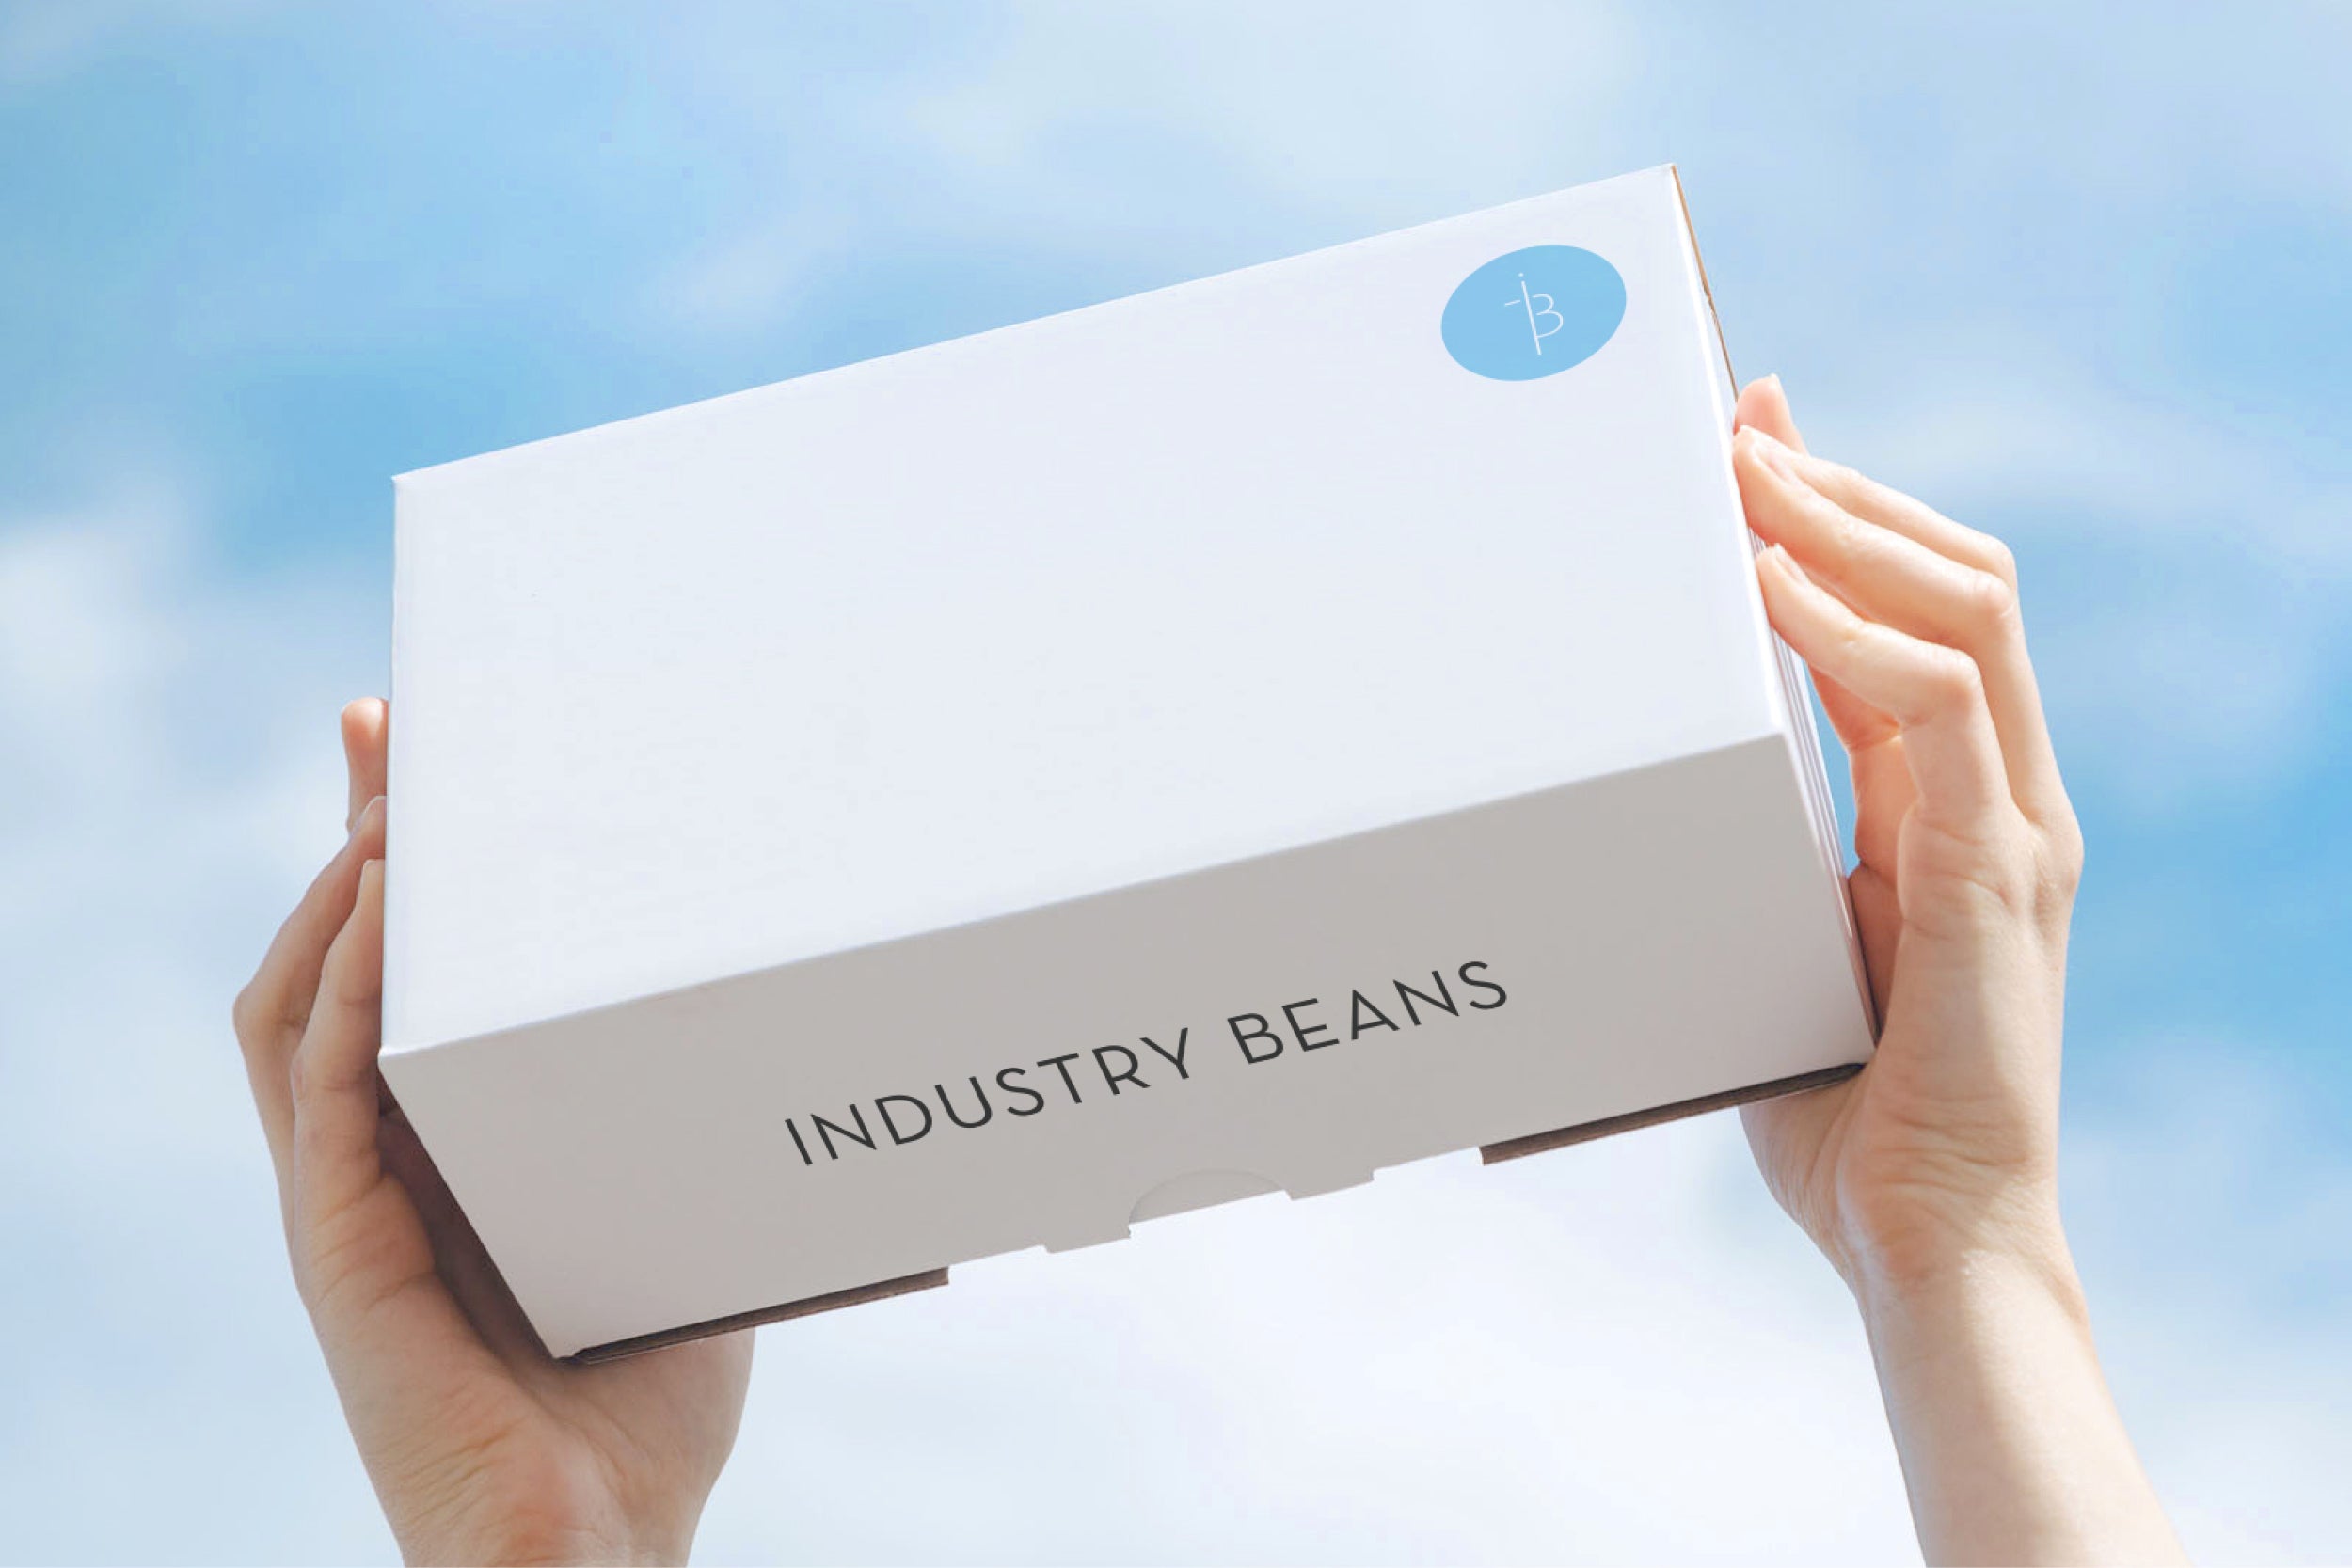 Industry Beans Is Now Shipping To The US!